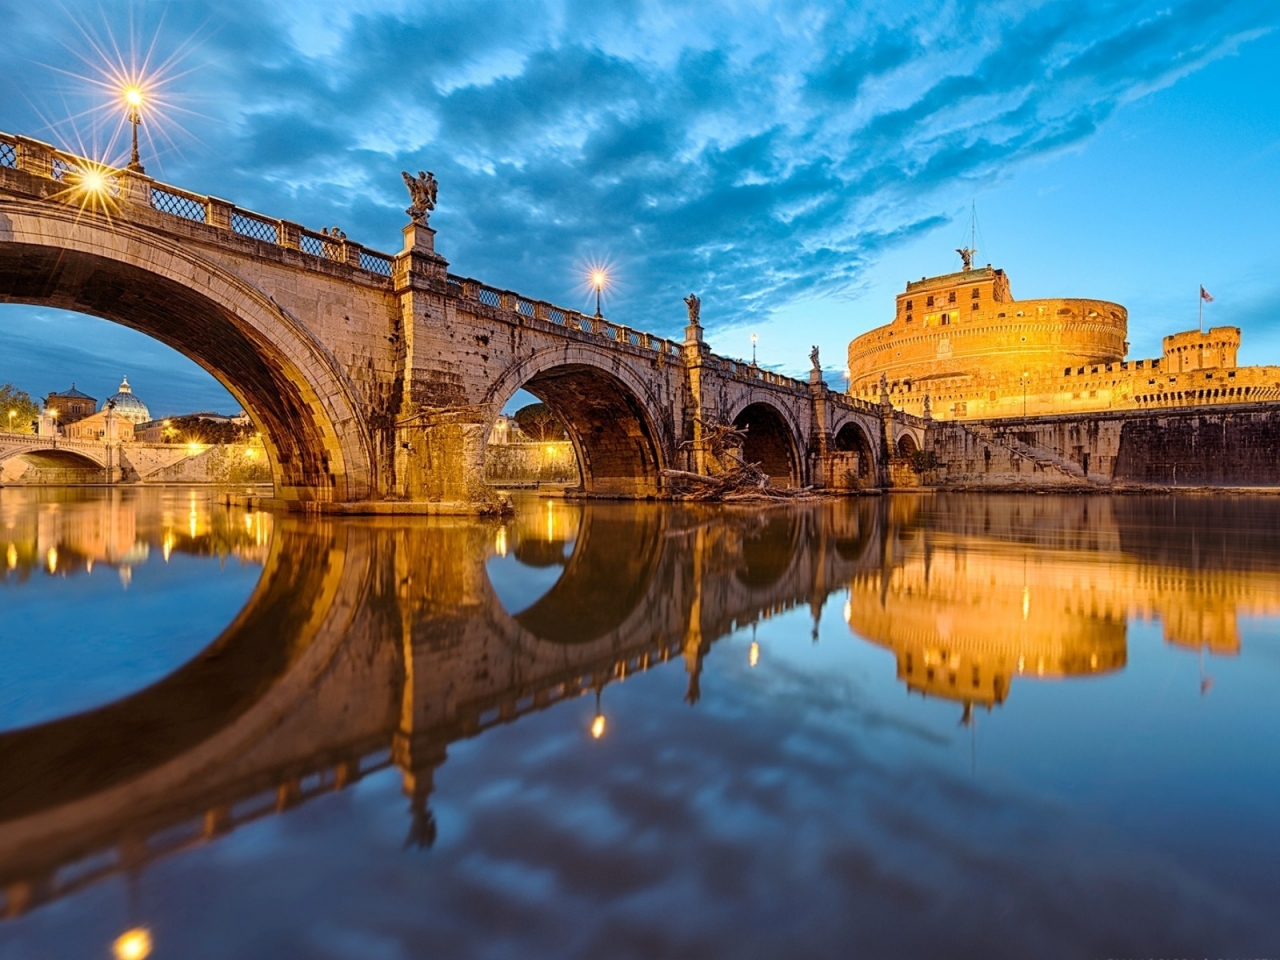 View of St Angelo Bridge for 1280 x 960 resolution